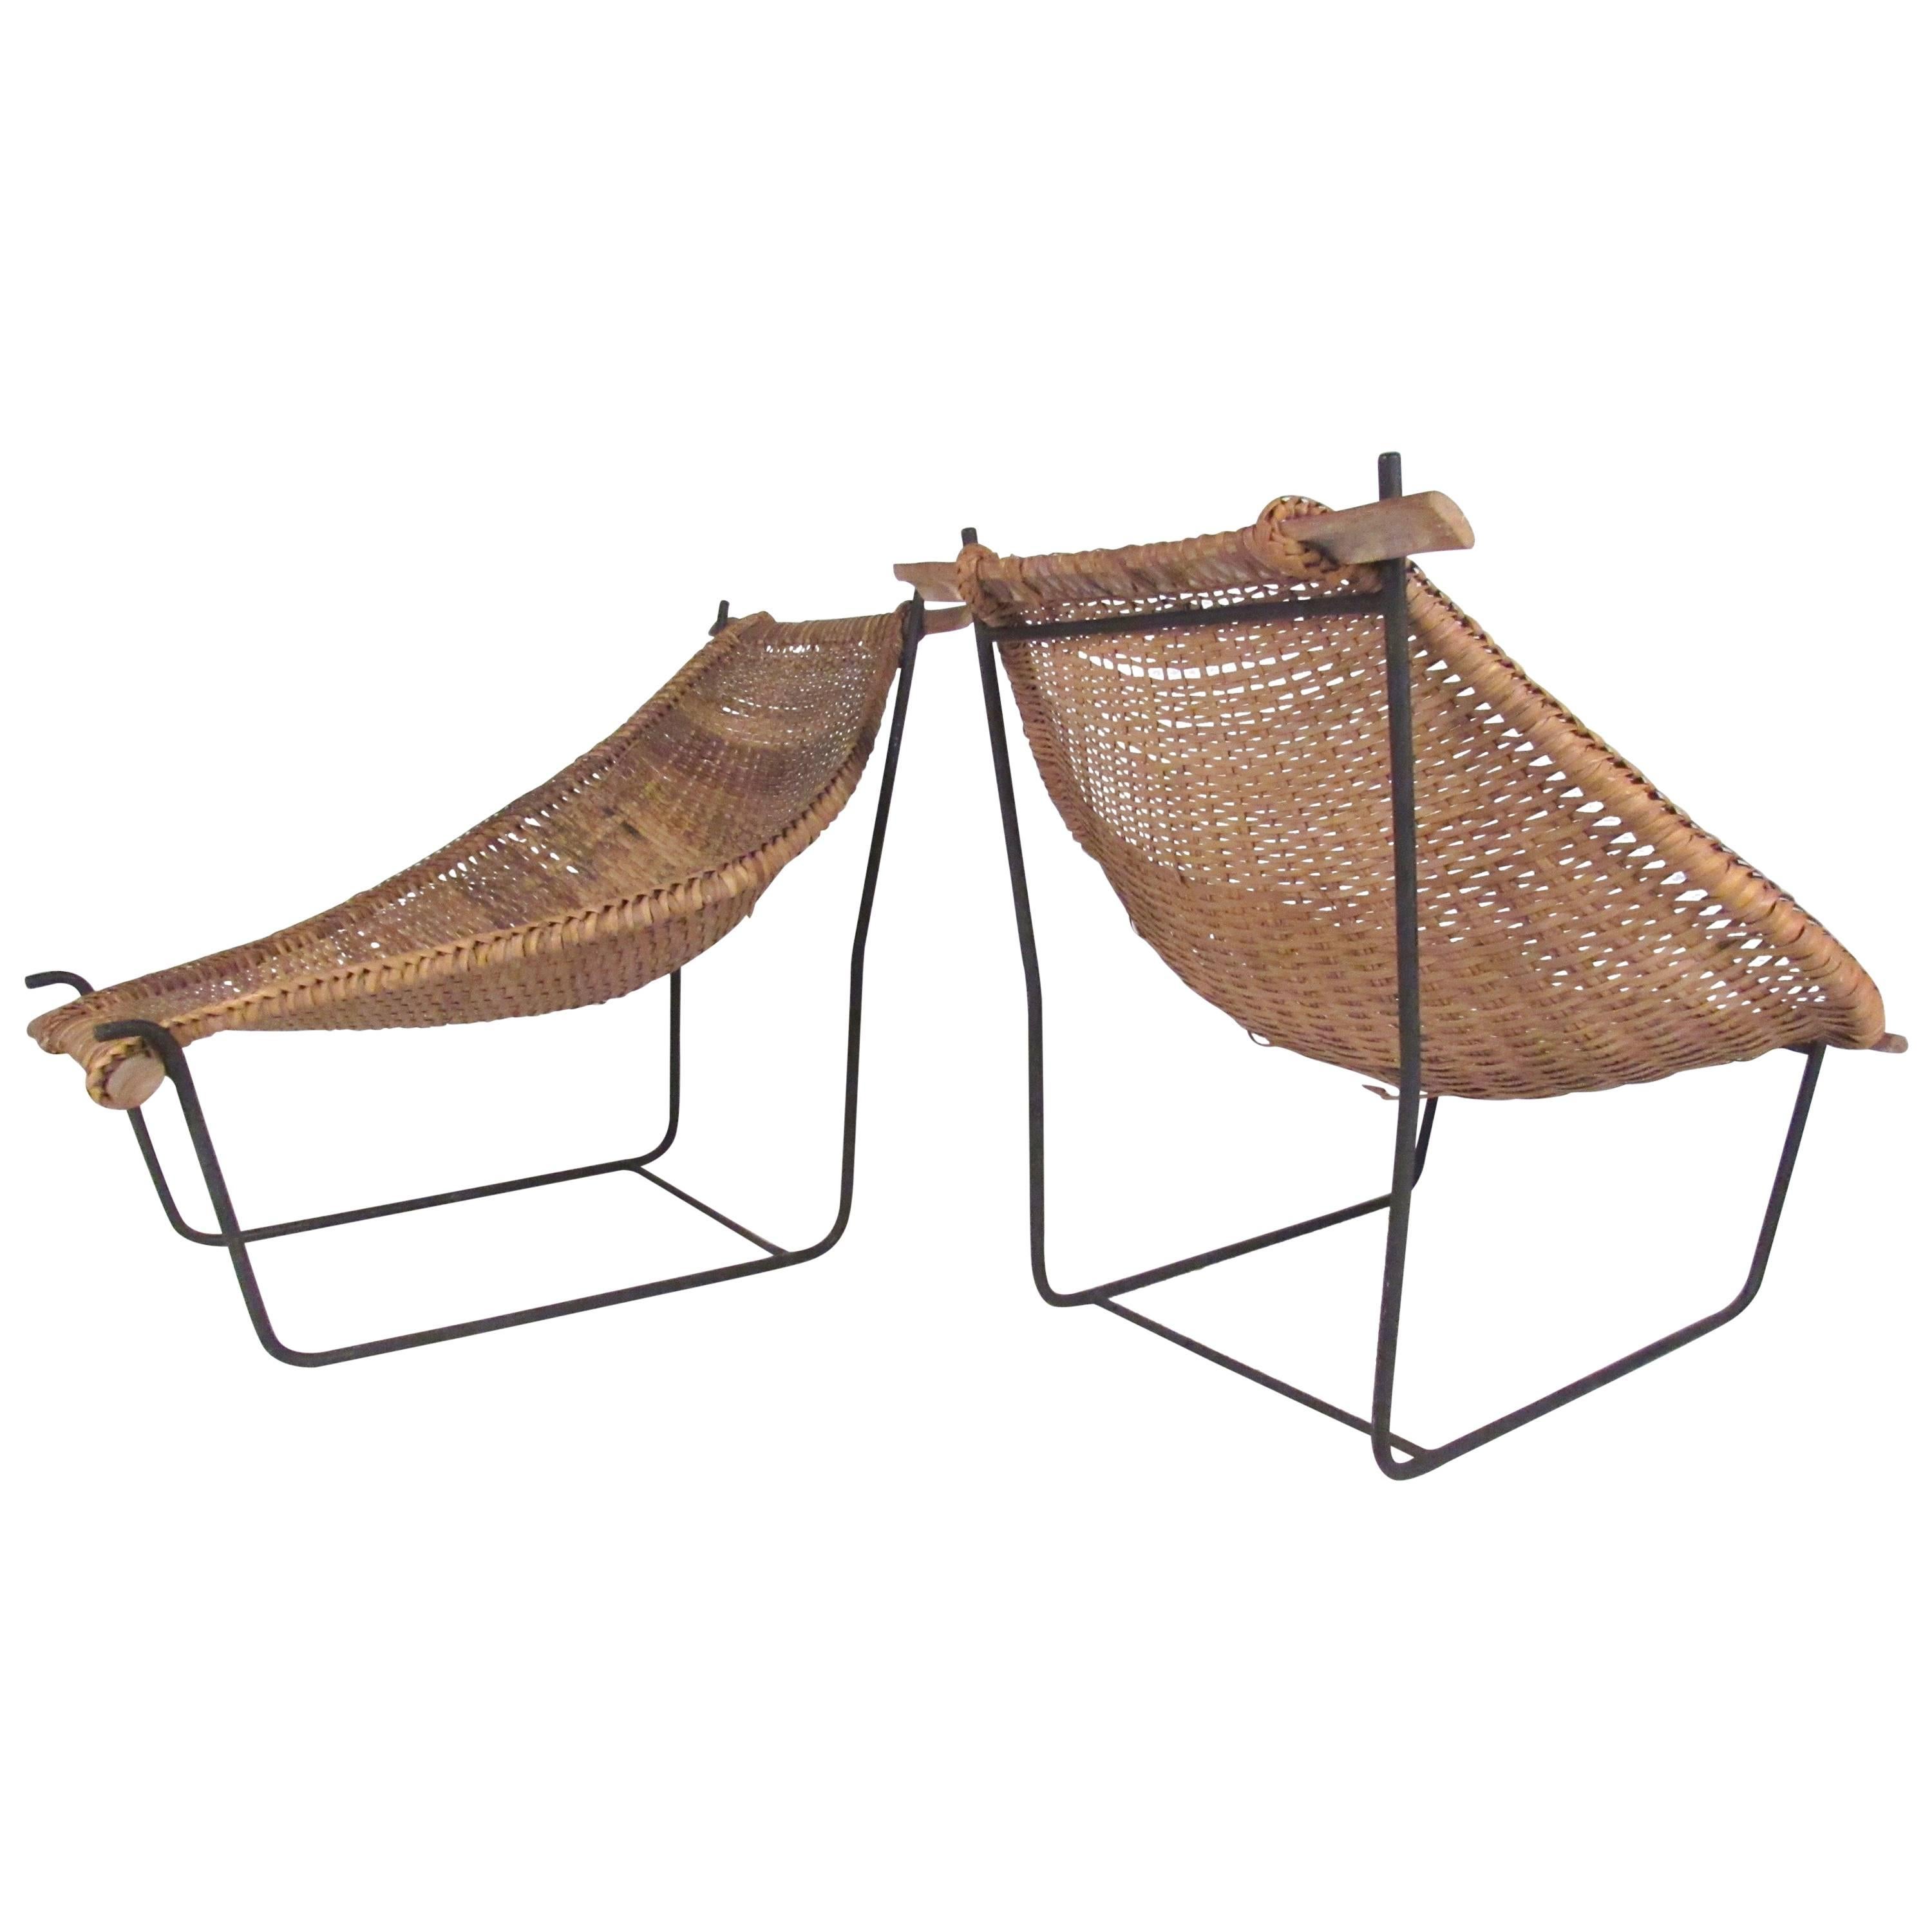 Pair of Vintage Modern Woven Wicker Sling Chairs